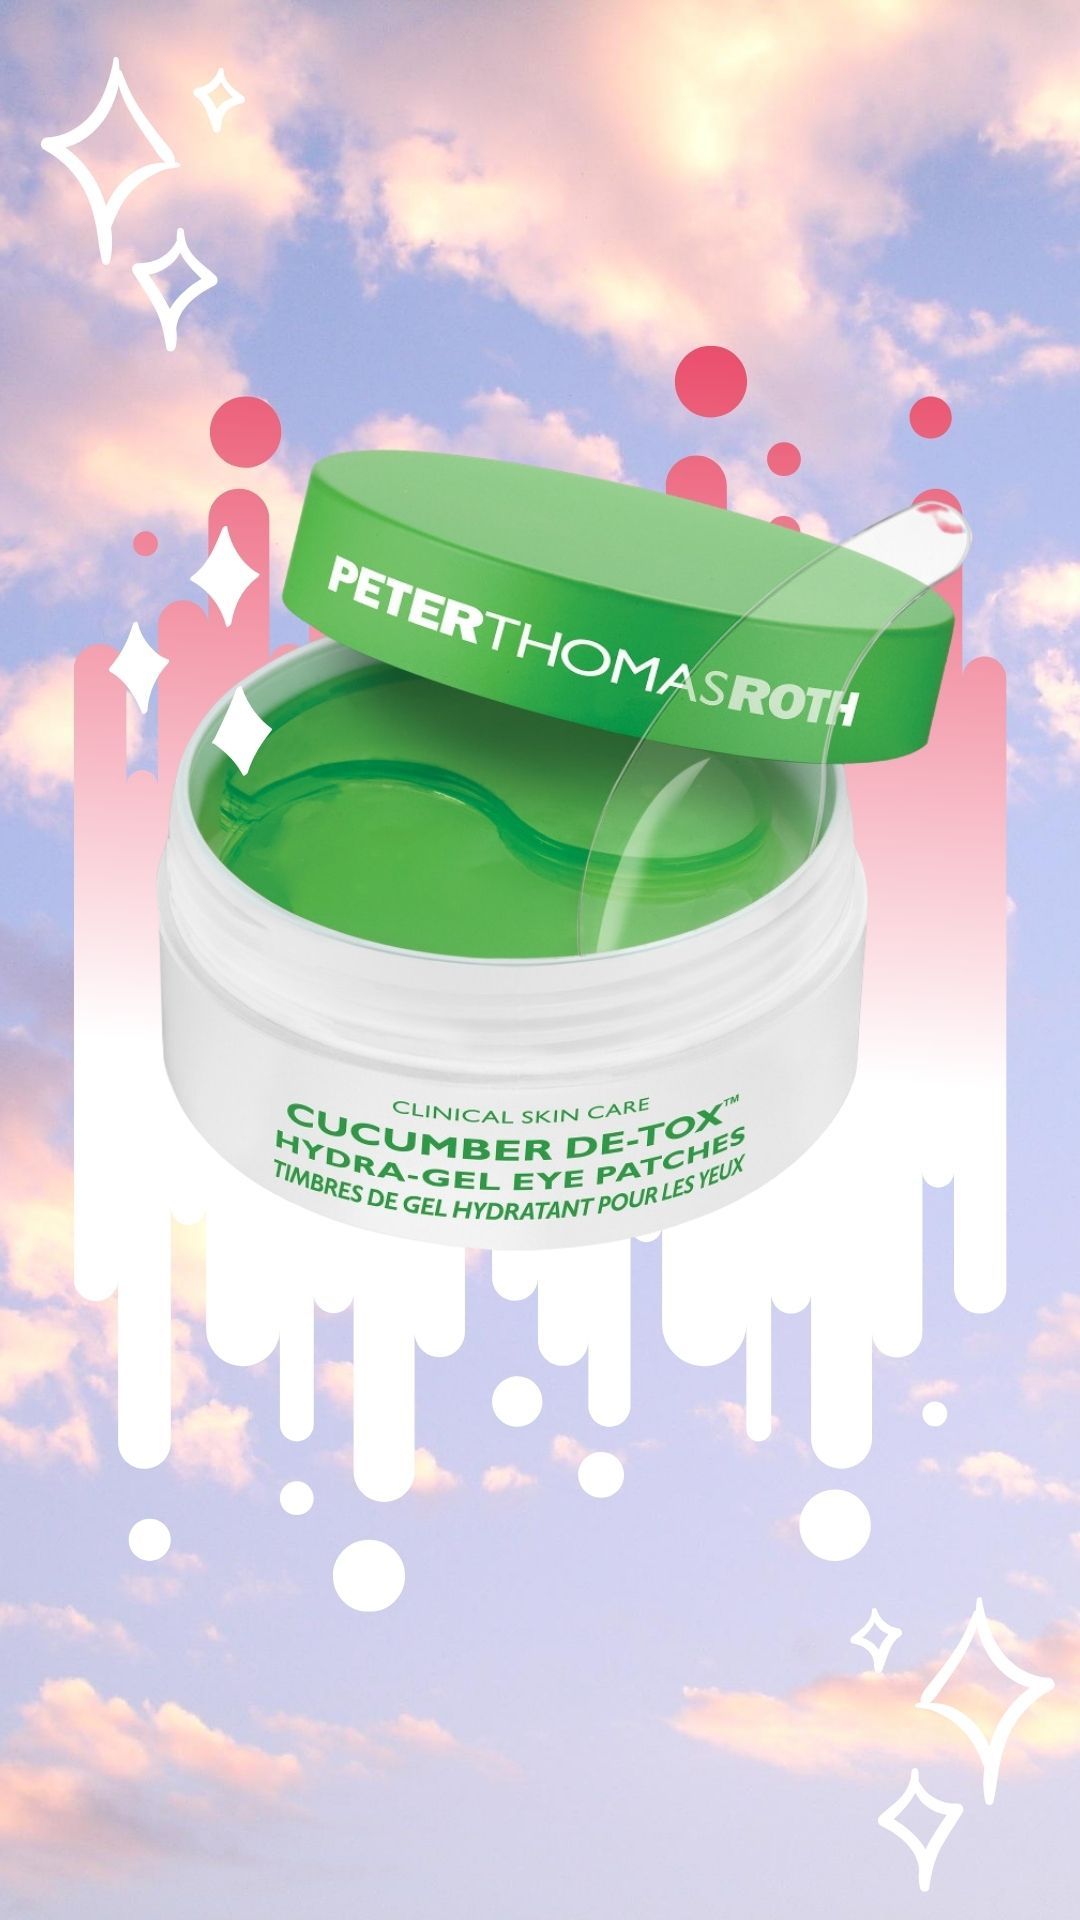 Peter Thomas Roth Cucumber De-Tox Hydra-Gel Under-Eye Patches